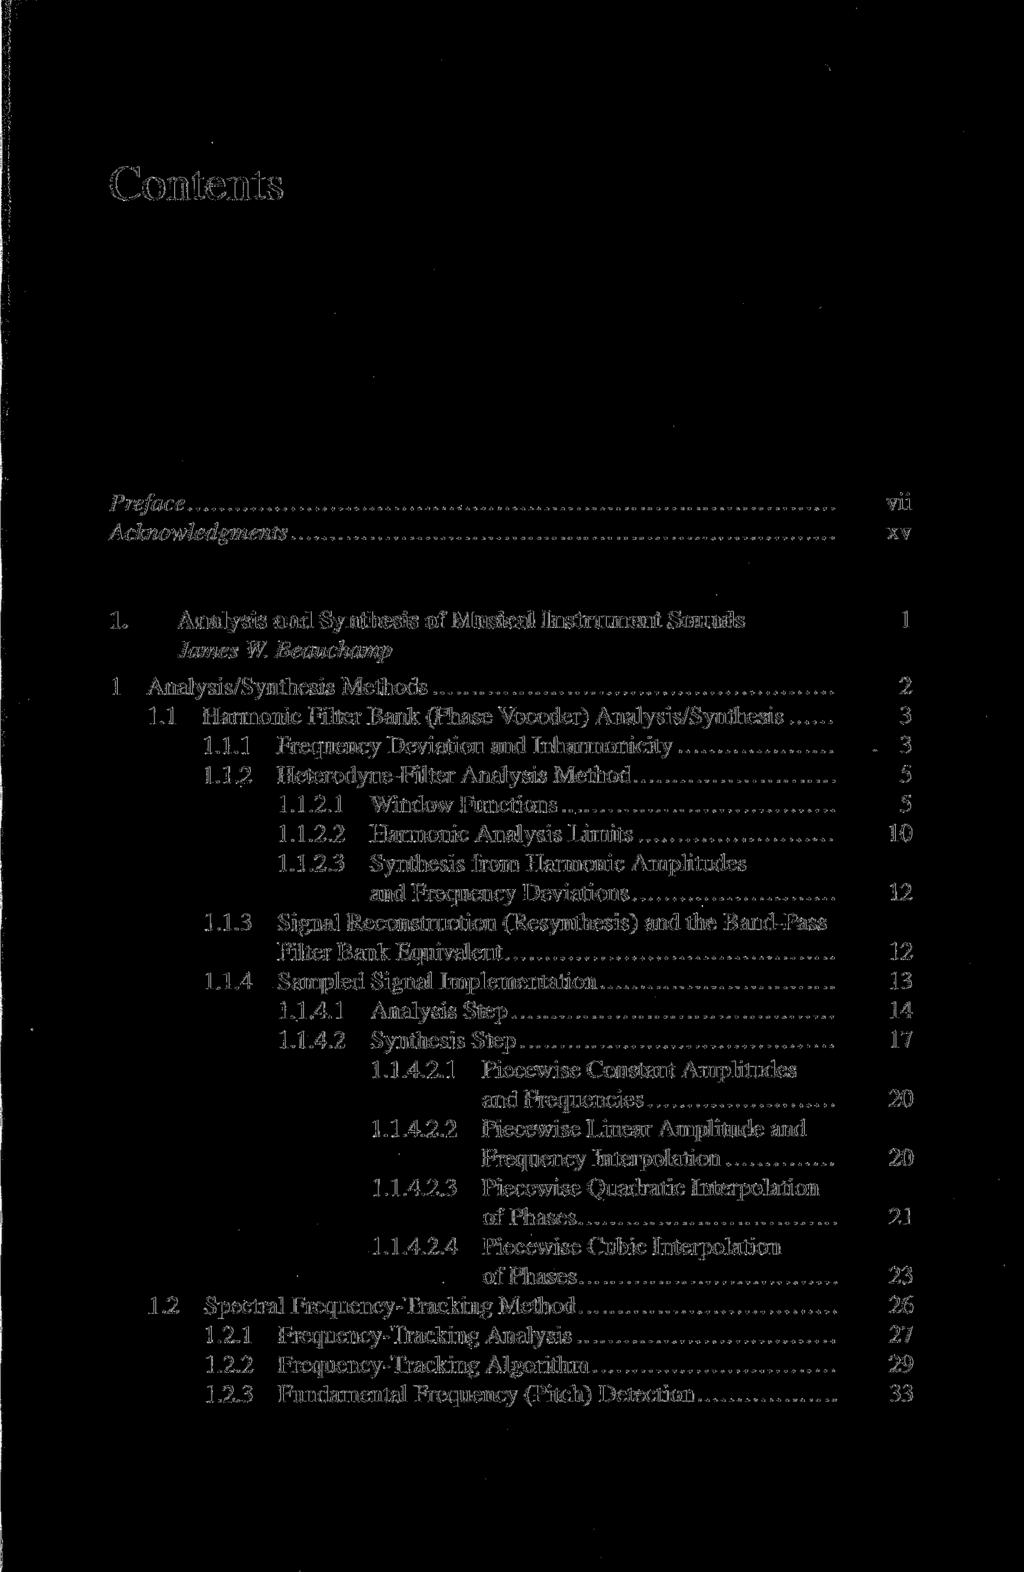 Contents Preface Acknowledgments vii xv 1. Analysis and Synthesis of Musical Instrument Sounds 1 James W. Beauchamp 1 Analysis/Synthesis Methods 2 1.